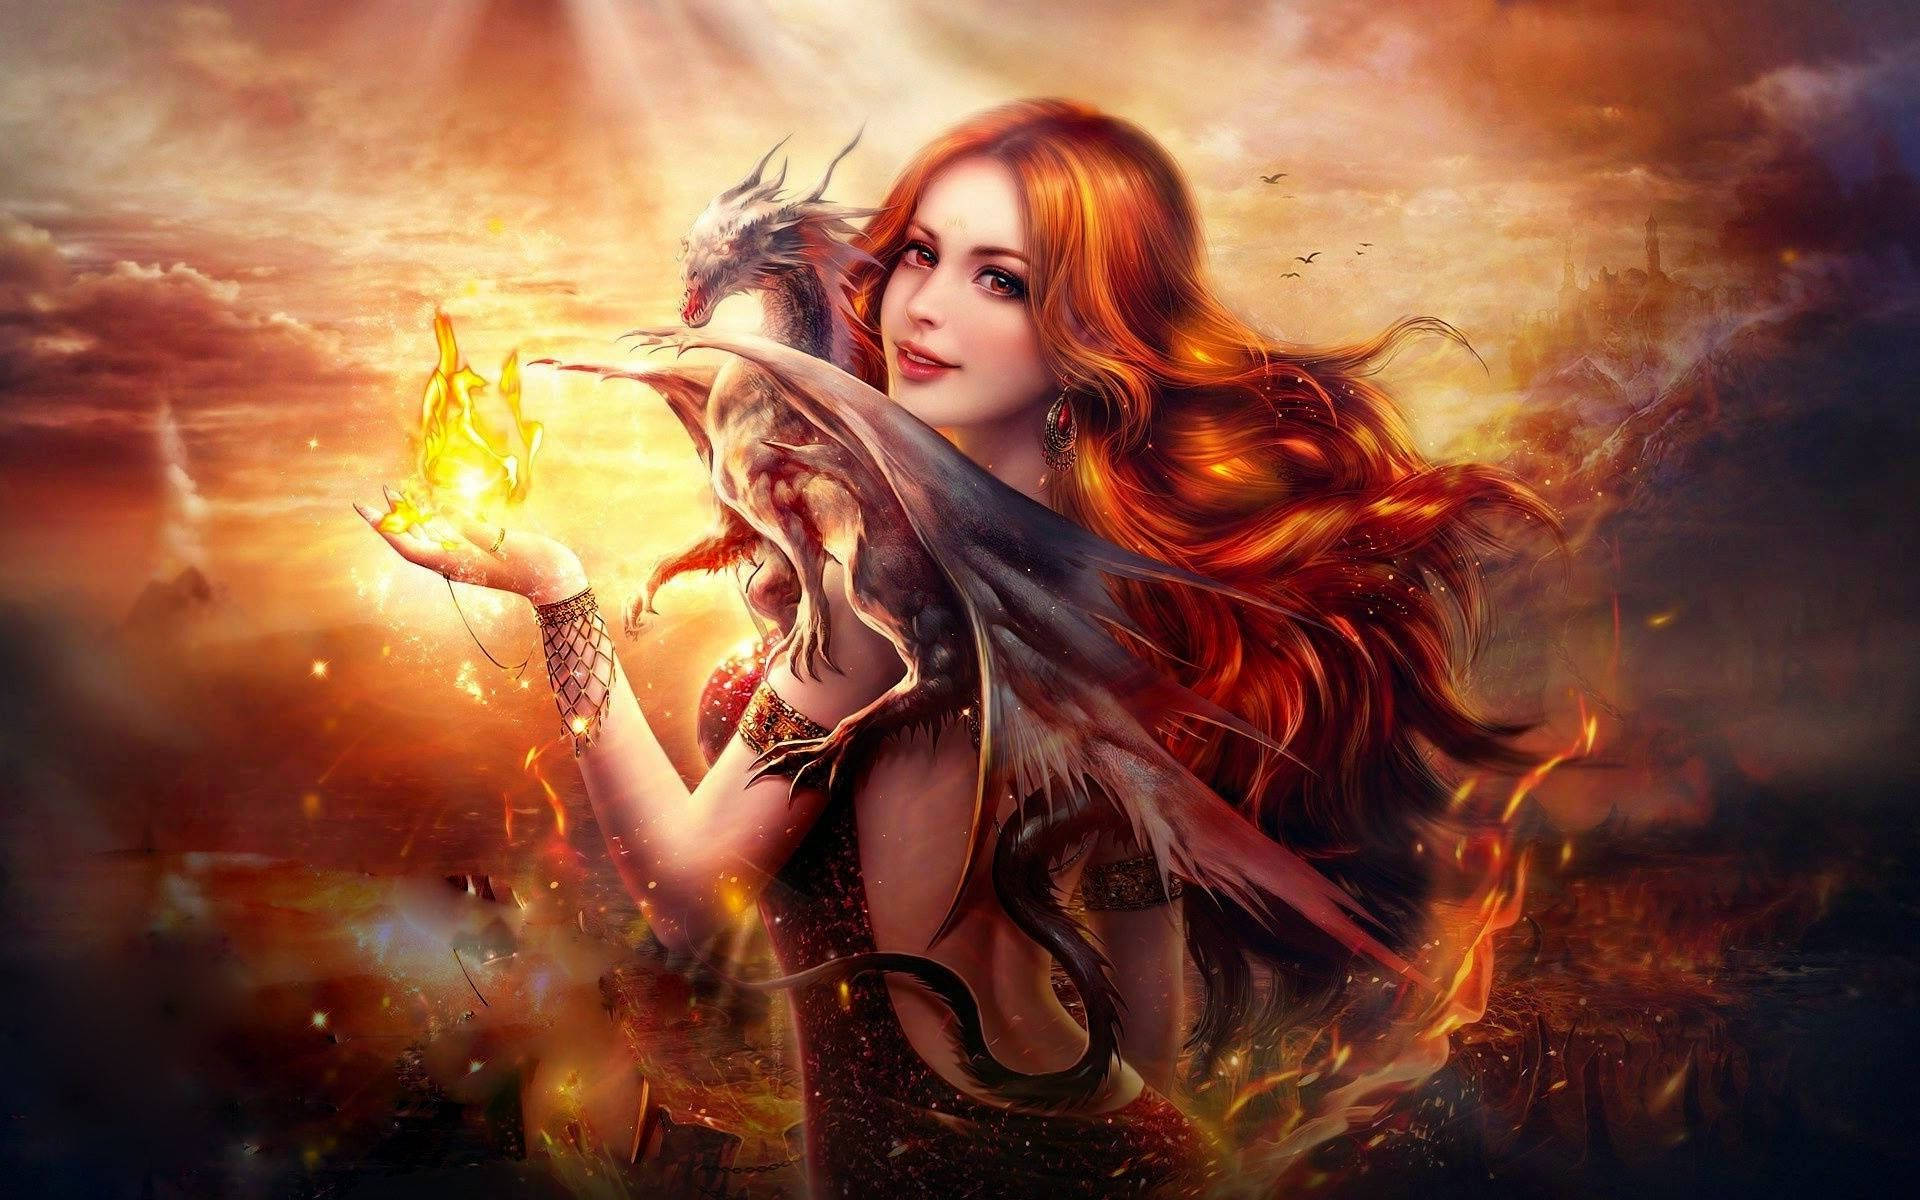 Daring Adventure - A Fantasy Girl Tries Her Hand at Fire-Breathing Wallpaper